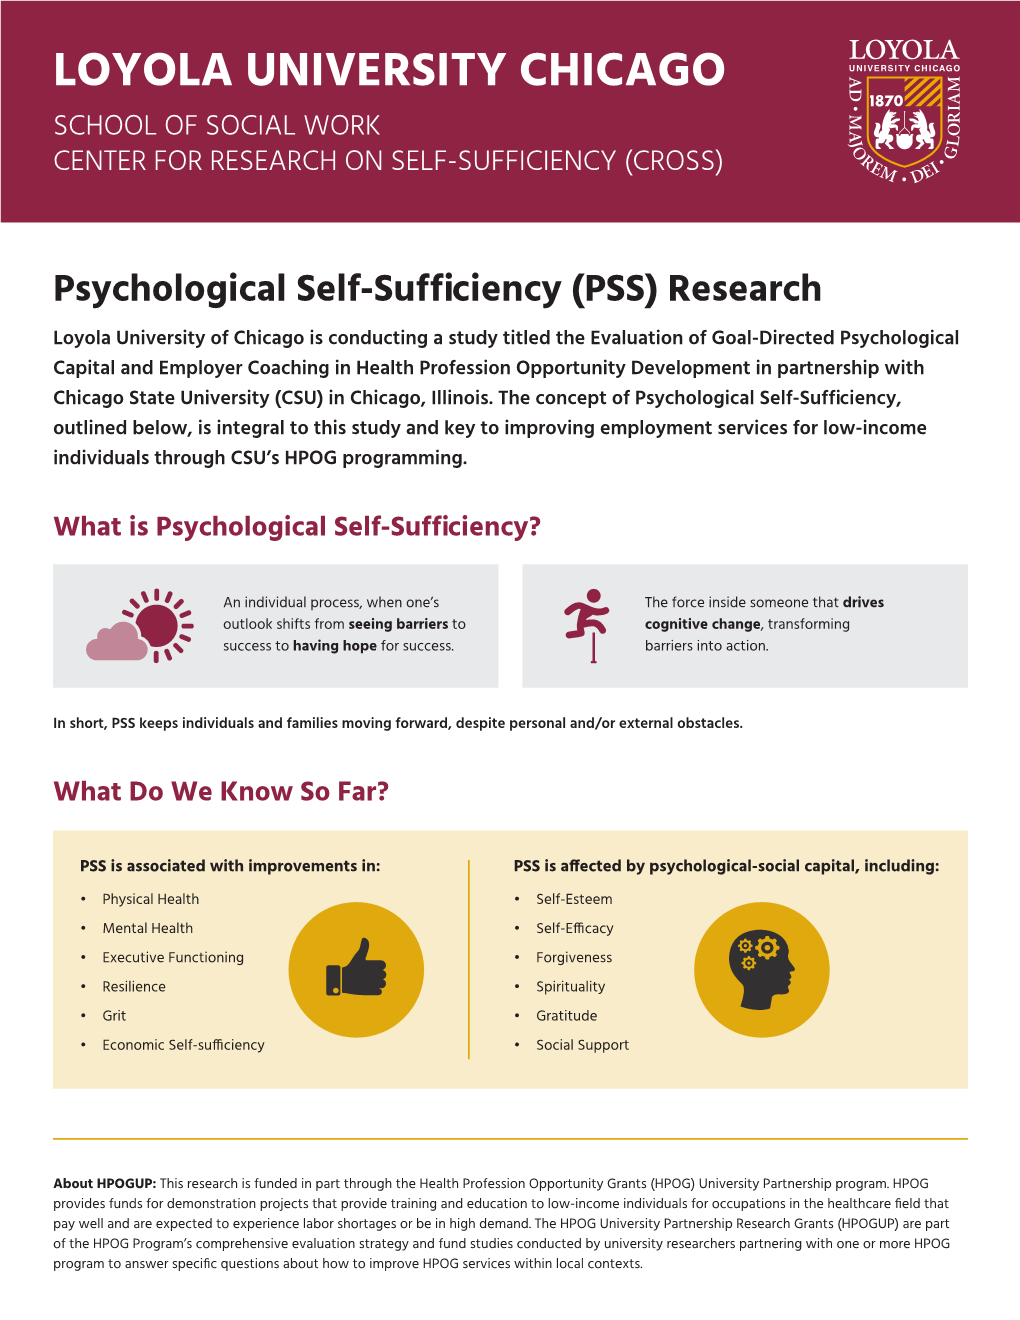 Psychological Self-Sufficiency